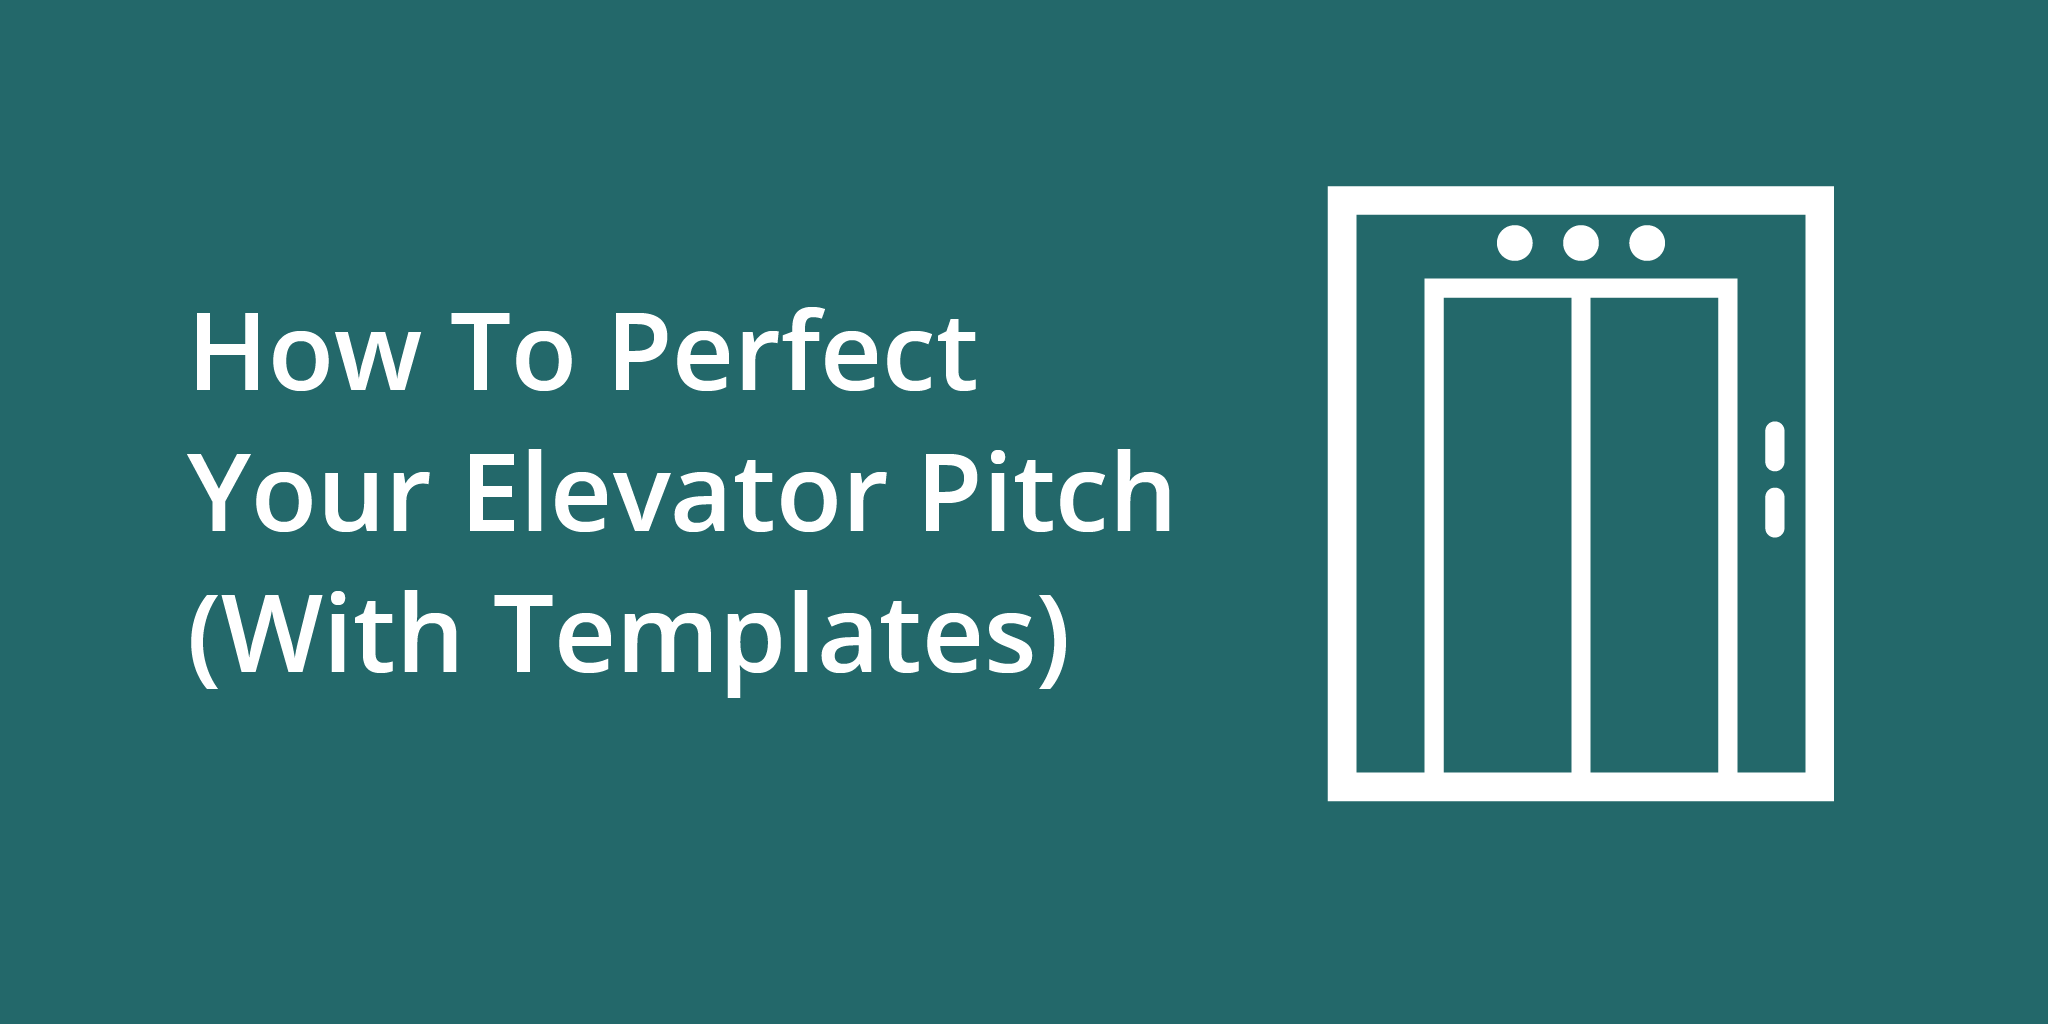 How To Perfect Your Elevator Pitch (With 4 Templates) | Telephones for business